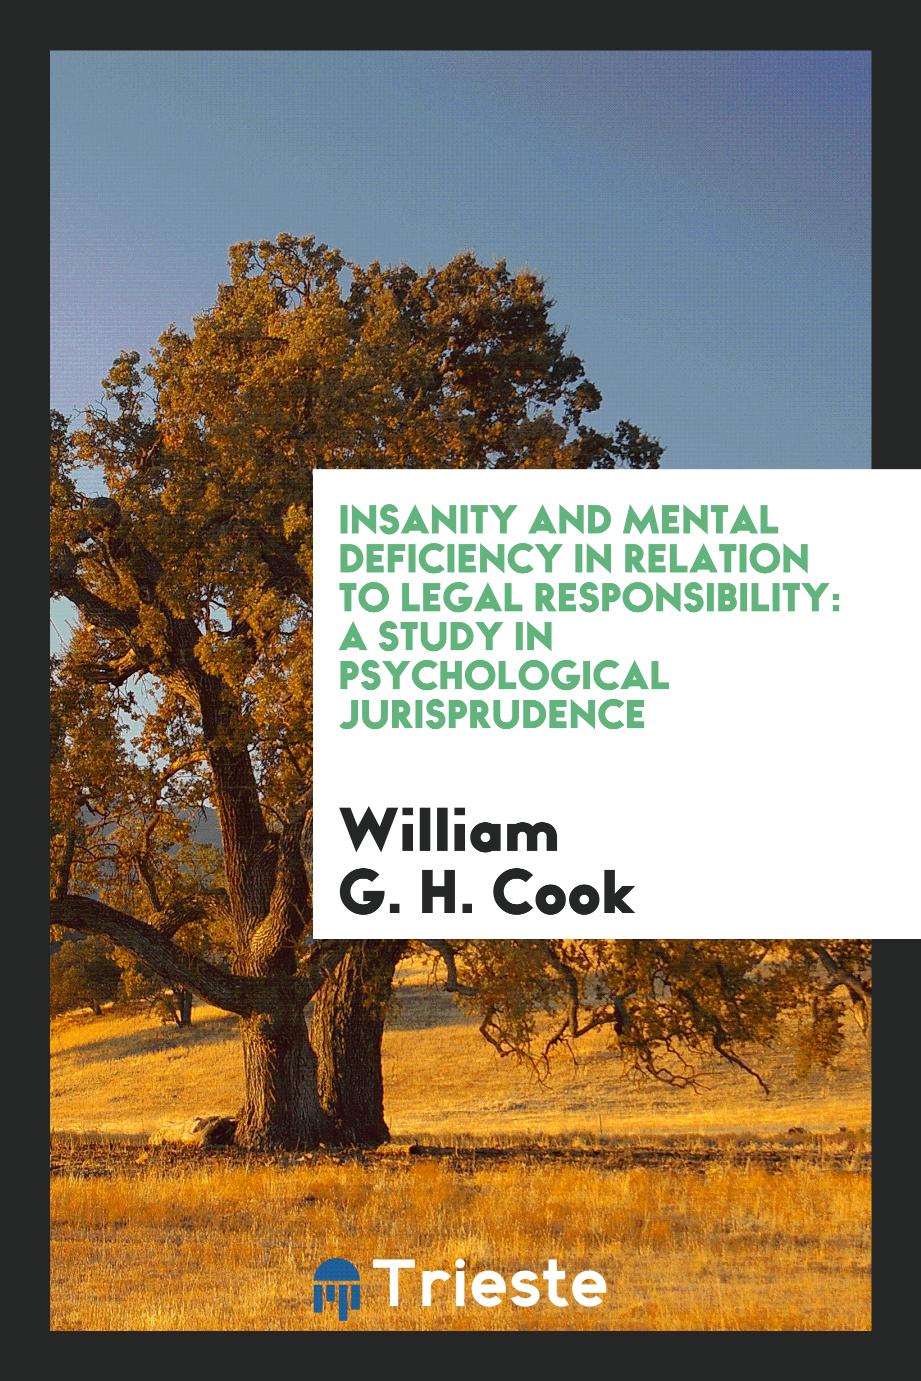 Insanity and mental deficiency in relation to legal responsibility: a study in psychological jurisprudence